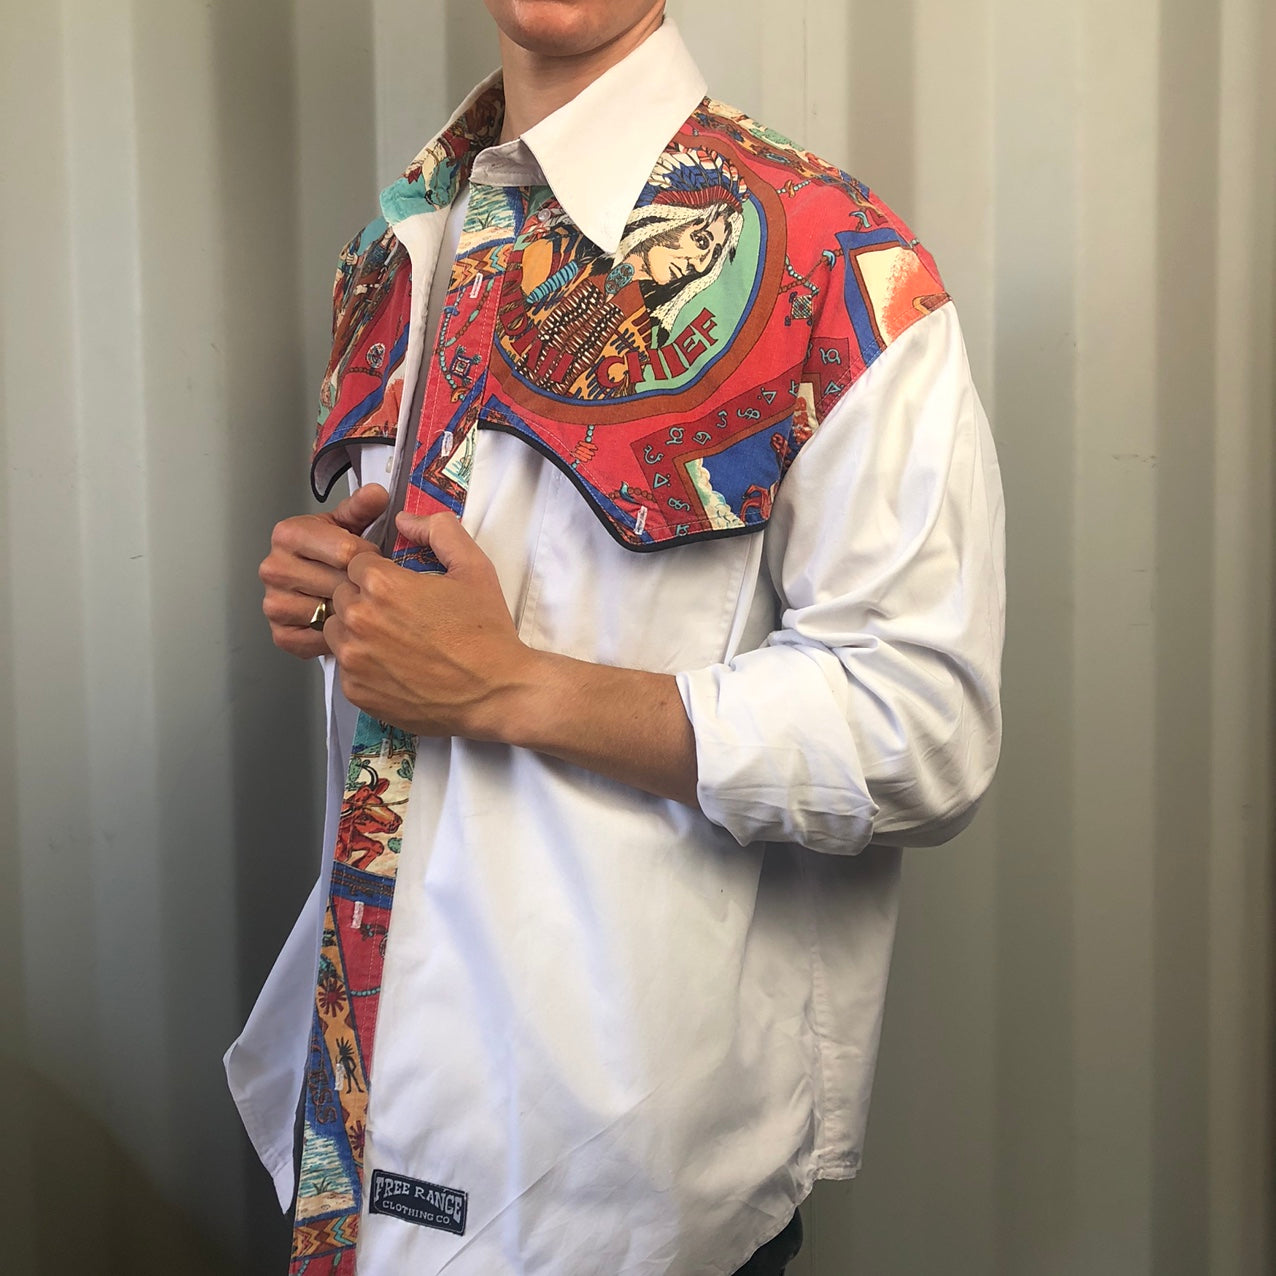 Men’s Vintage Overshirt Casual Shirt with Native American Pattern Design - XL/Large